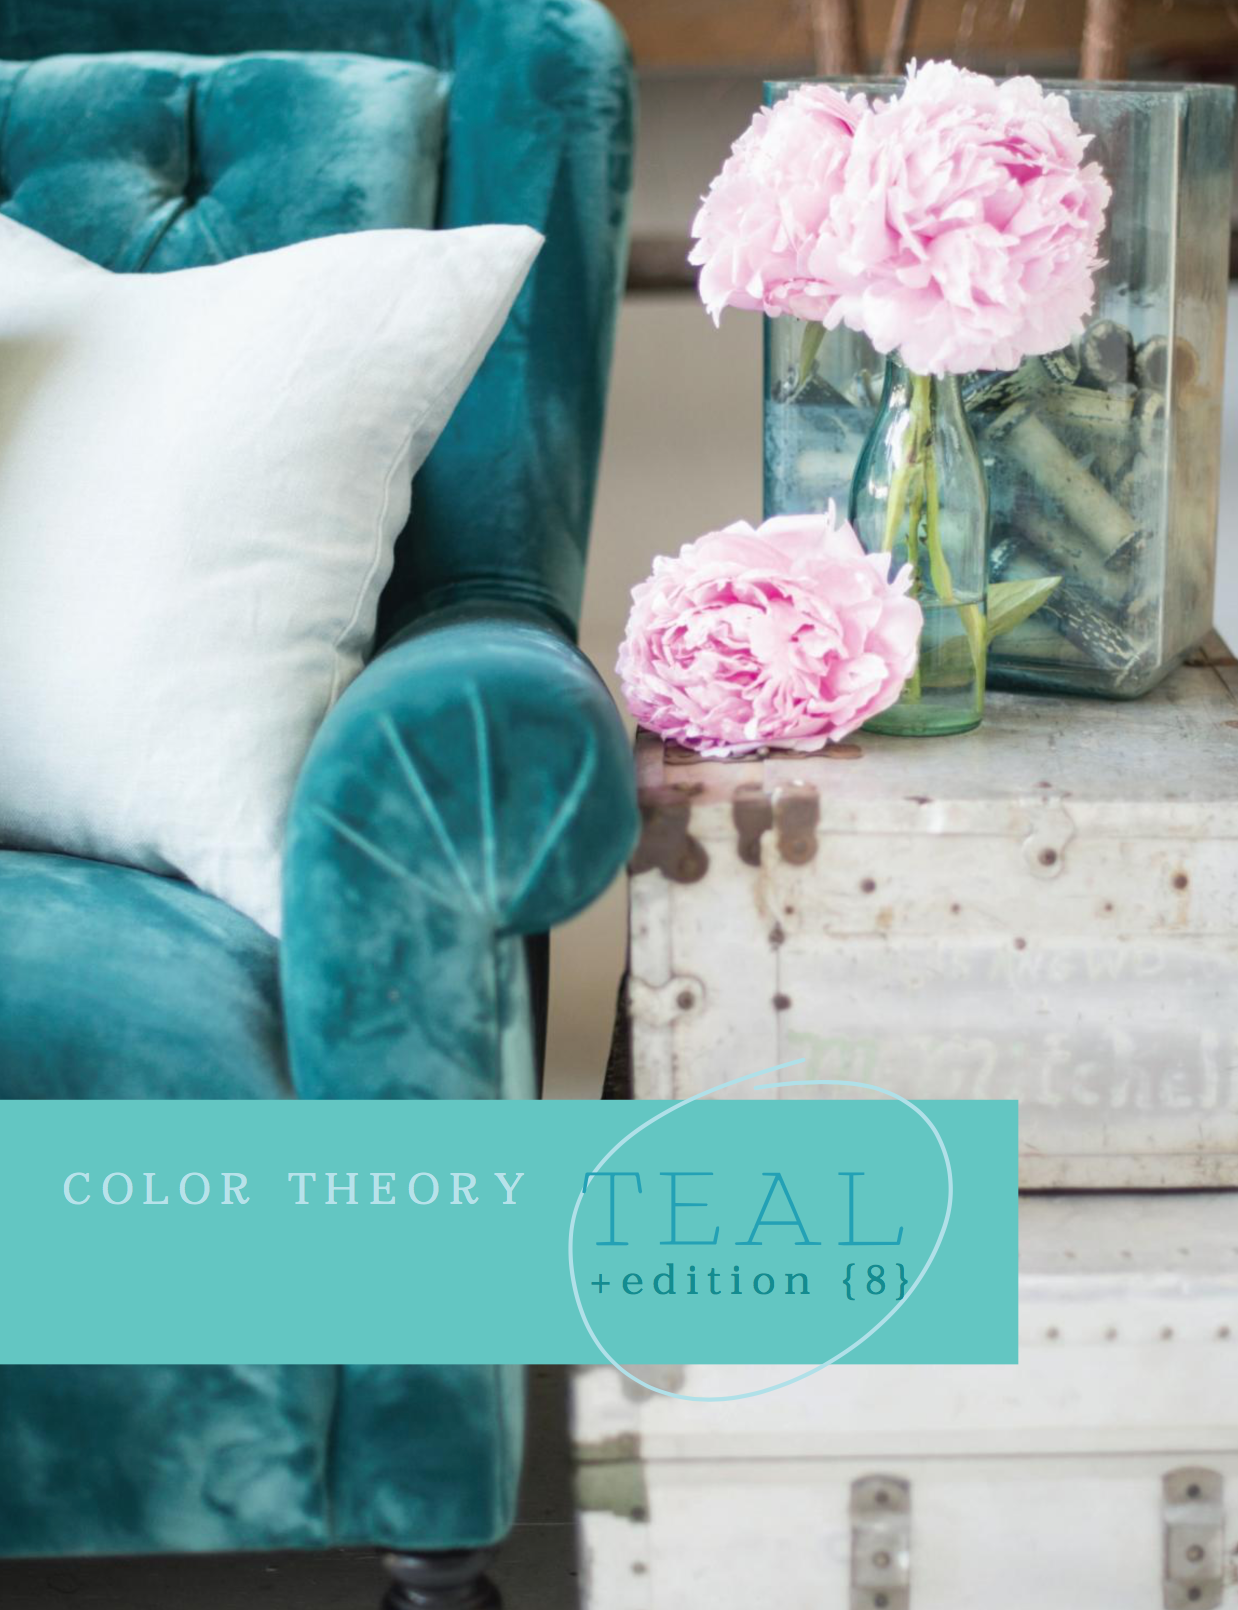 COLOR THEORY // TEAL